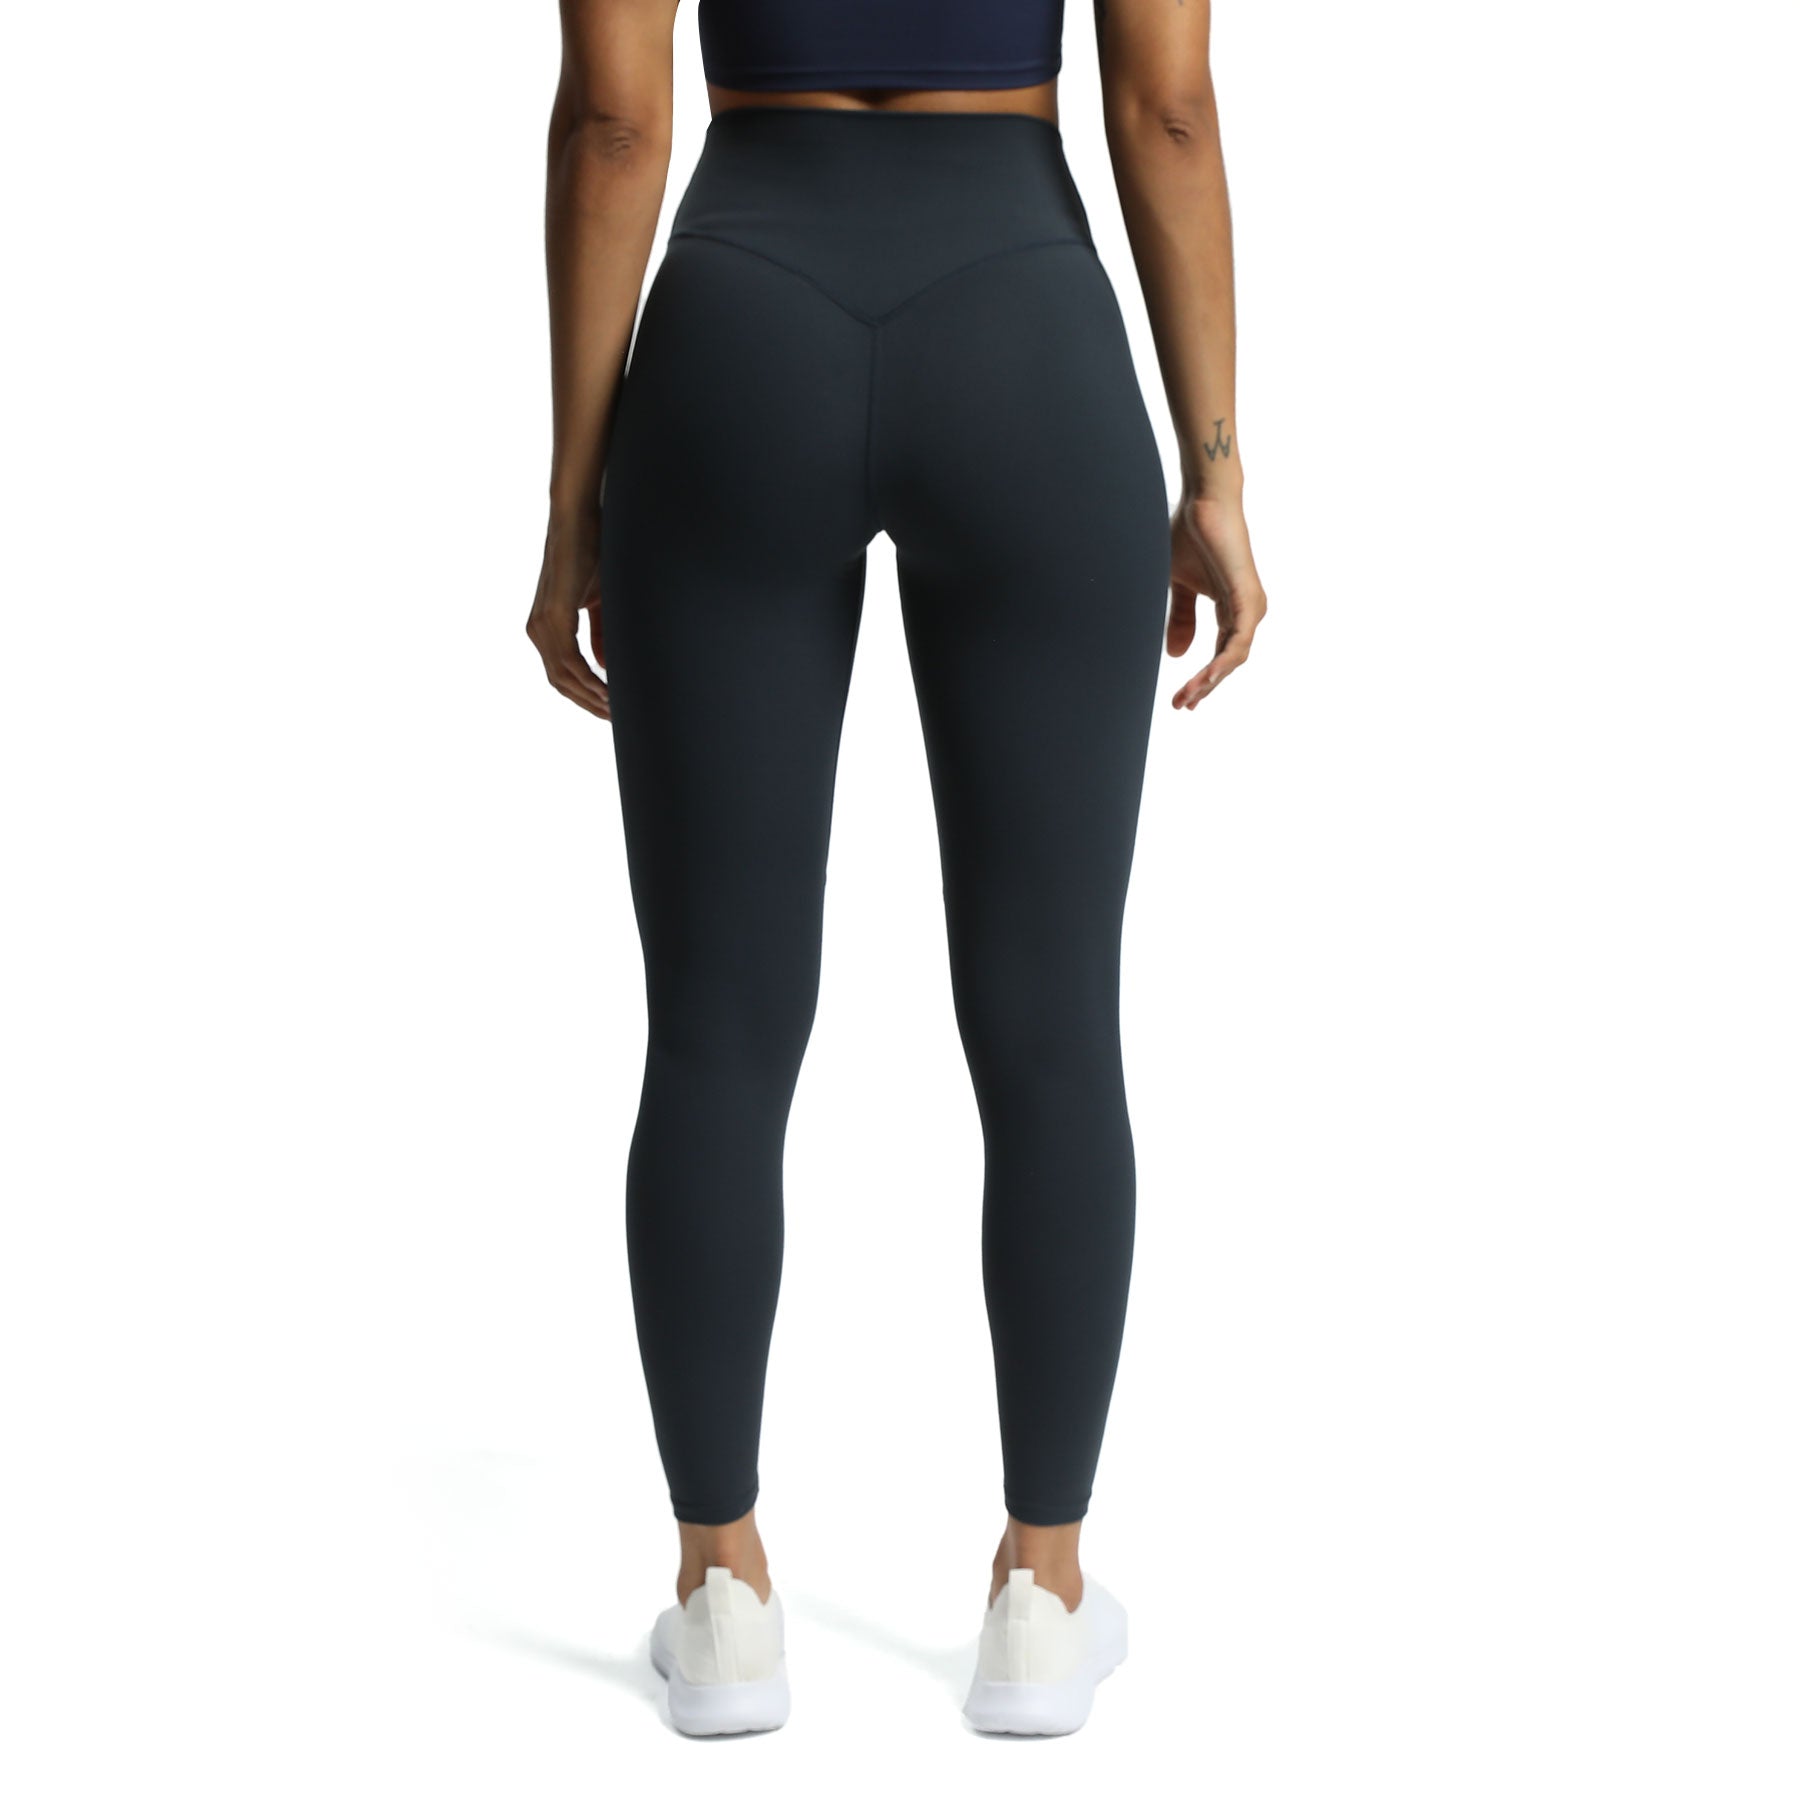 Aoxjox High Waisted Seamless Leggings Black Size XS - $16 (40% Off  Retail) - From Sammie